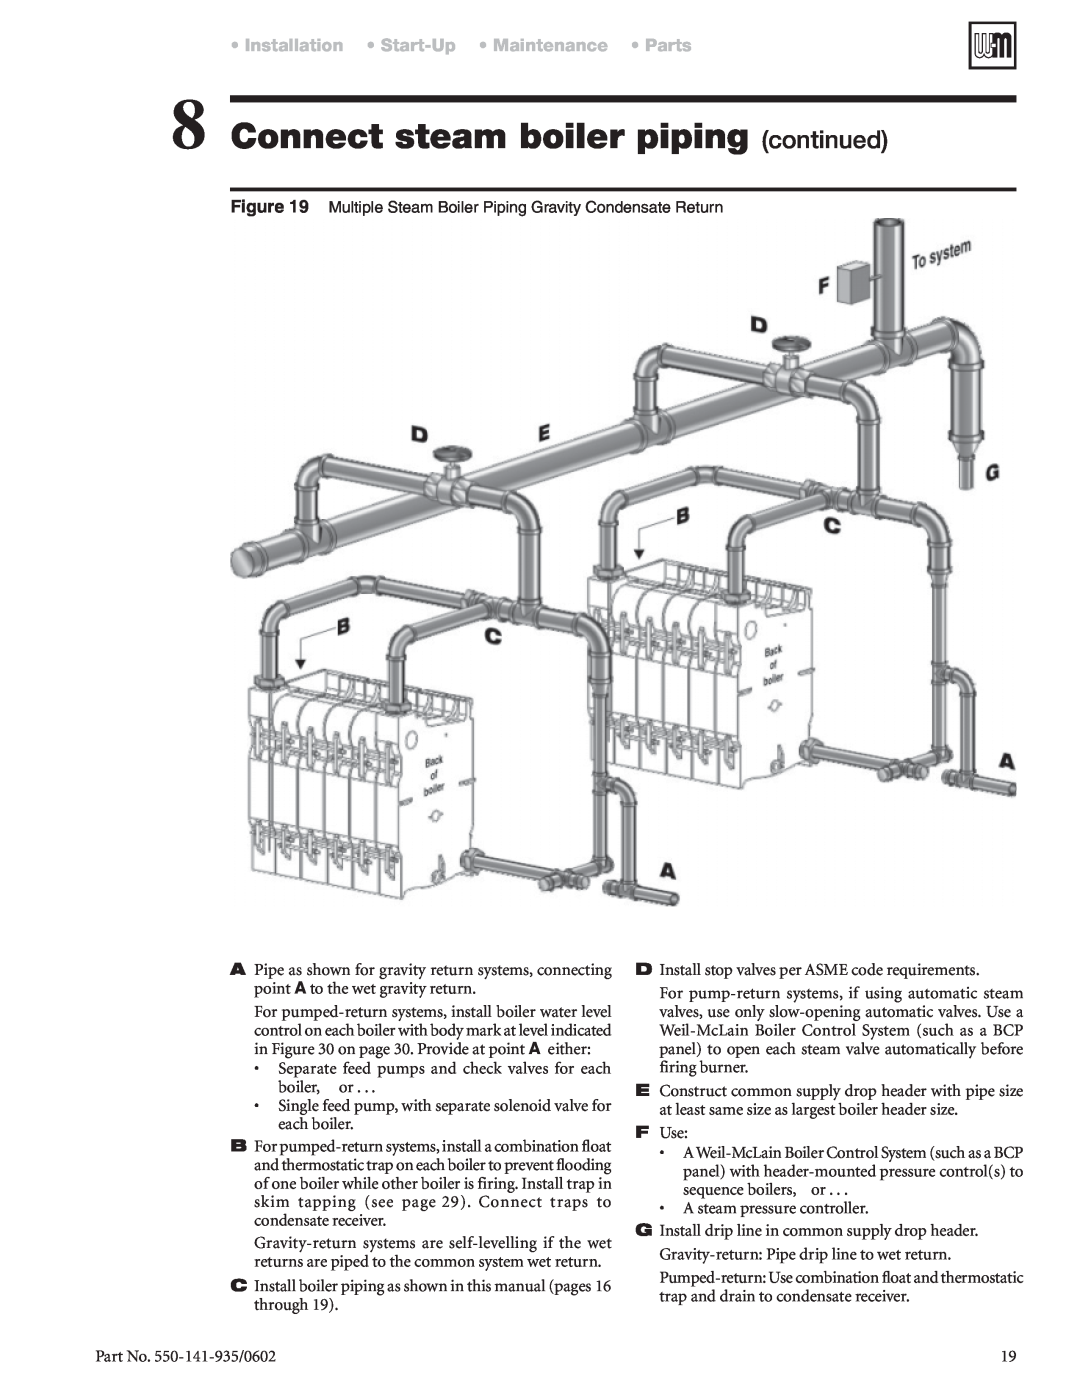 Weil-McLain 80 manual Connect steam boiler piping continued, Installation Start-Up Maintenance Parts 